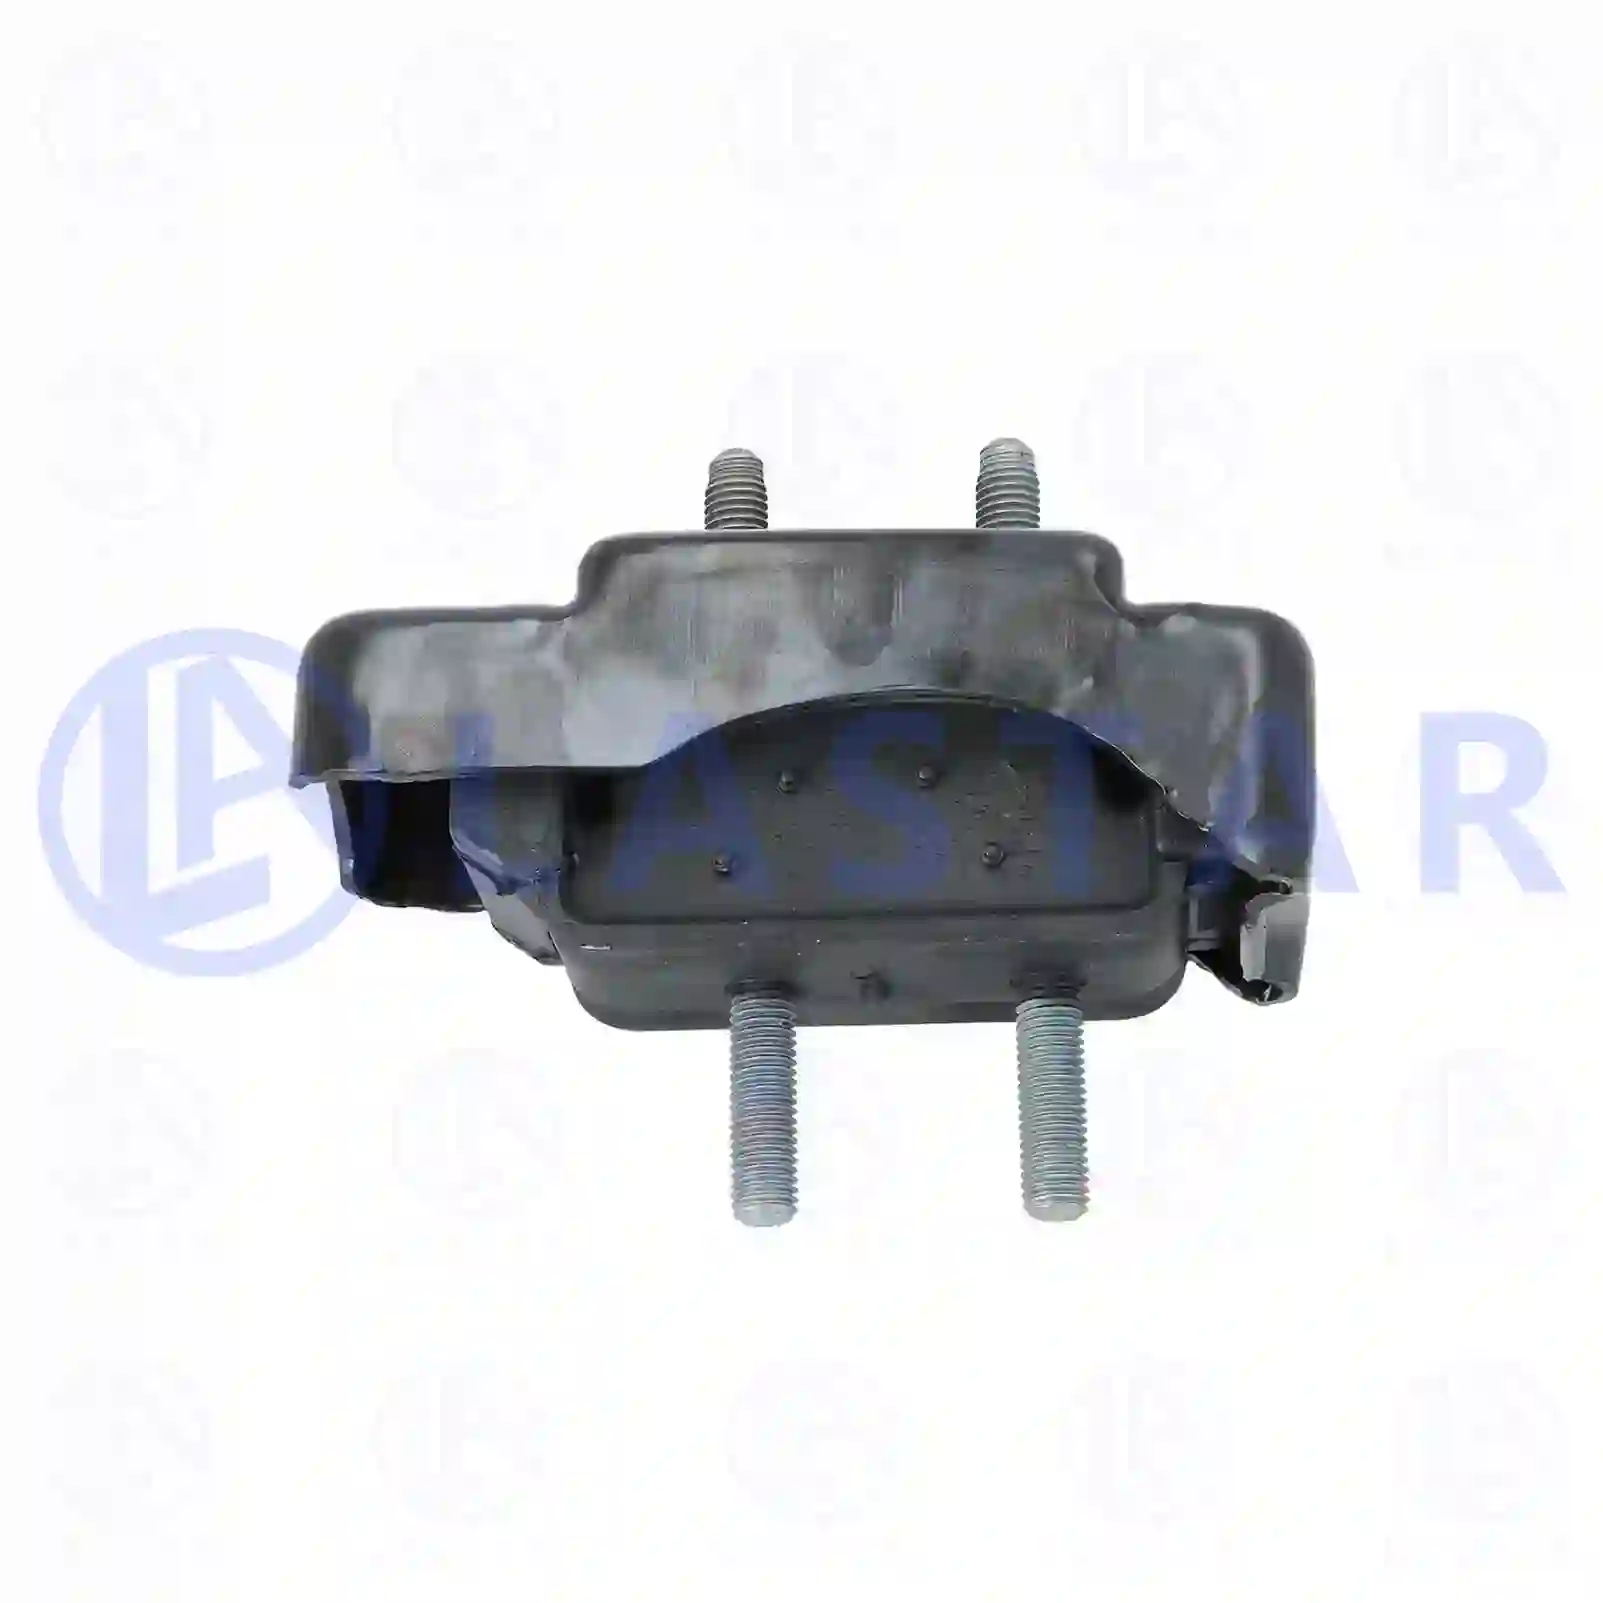 Engine mounting, front, 77703805, 5801283685, 60147 ||  77703805 Lastar Spare Part | Truck Spare Parts, Auotomotive Spare Parts Engine mounting, front, 77703805, 5801283685, 60147 ||  77703805 Lastar Spare Part | Truck Spare Parts, Auotomotive Spare Parts